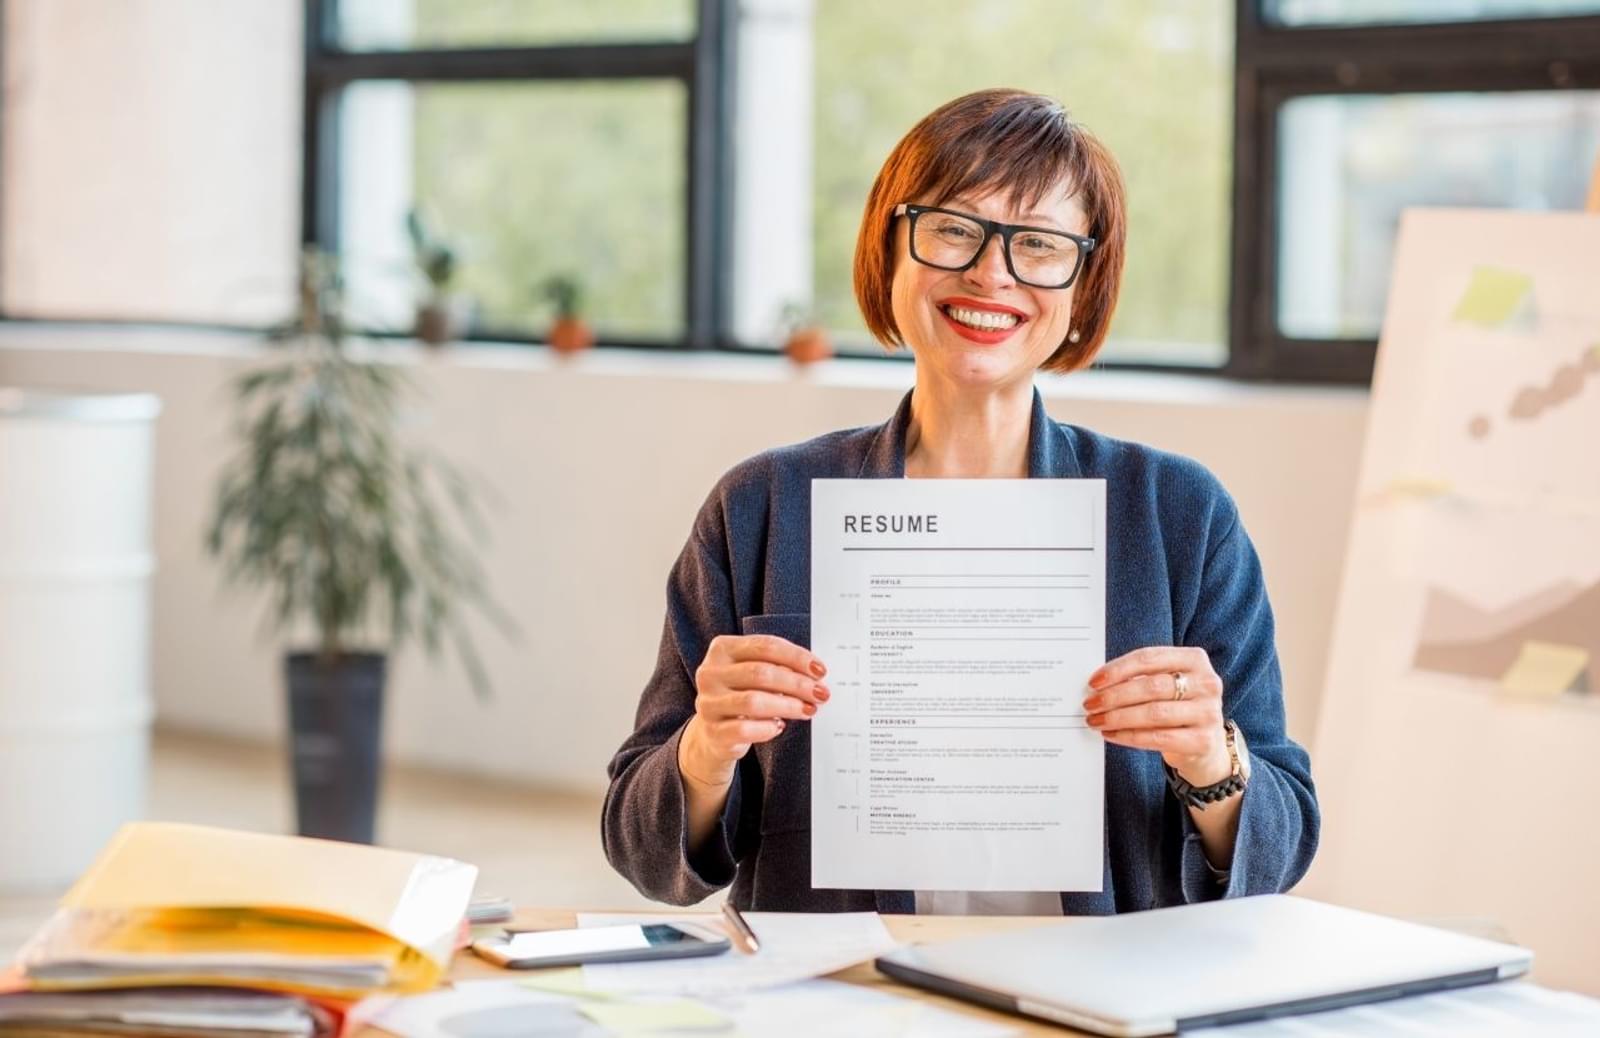 smiling woman holding up resume